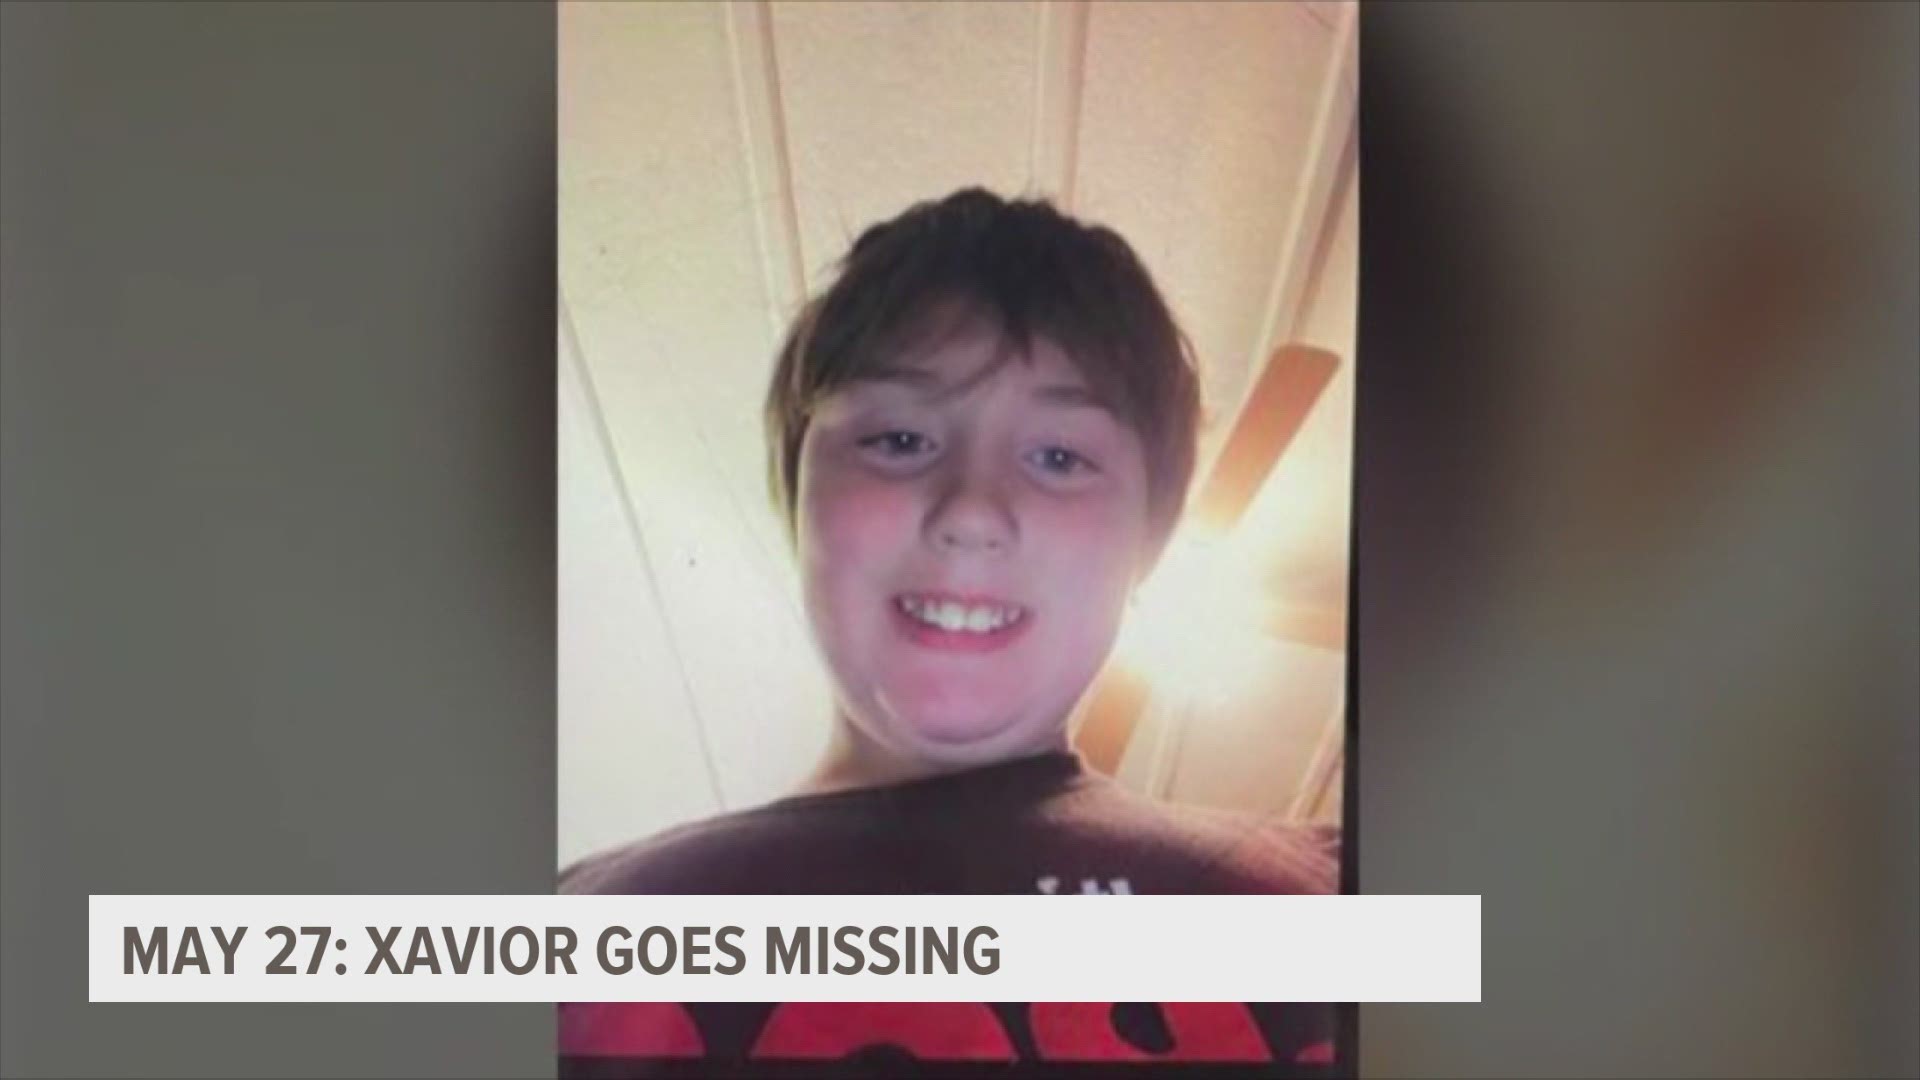 The reward fund for any information surrounding Xavior's disappearance has grown more than $30,000.